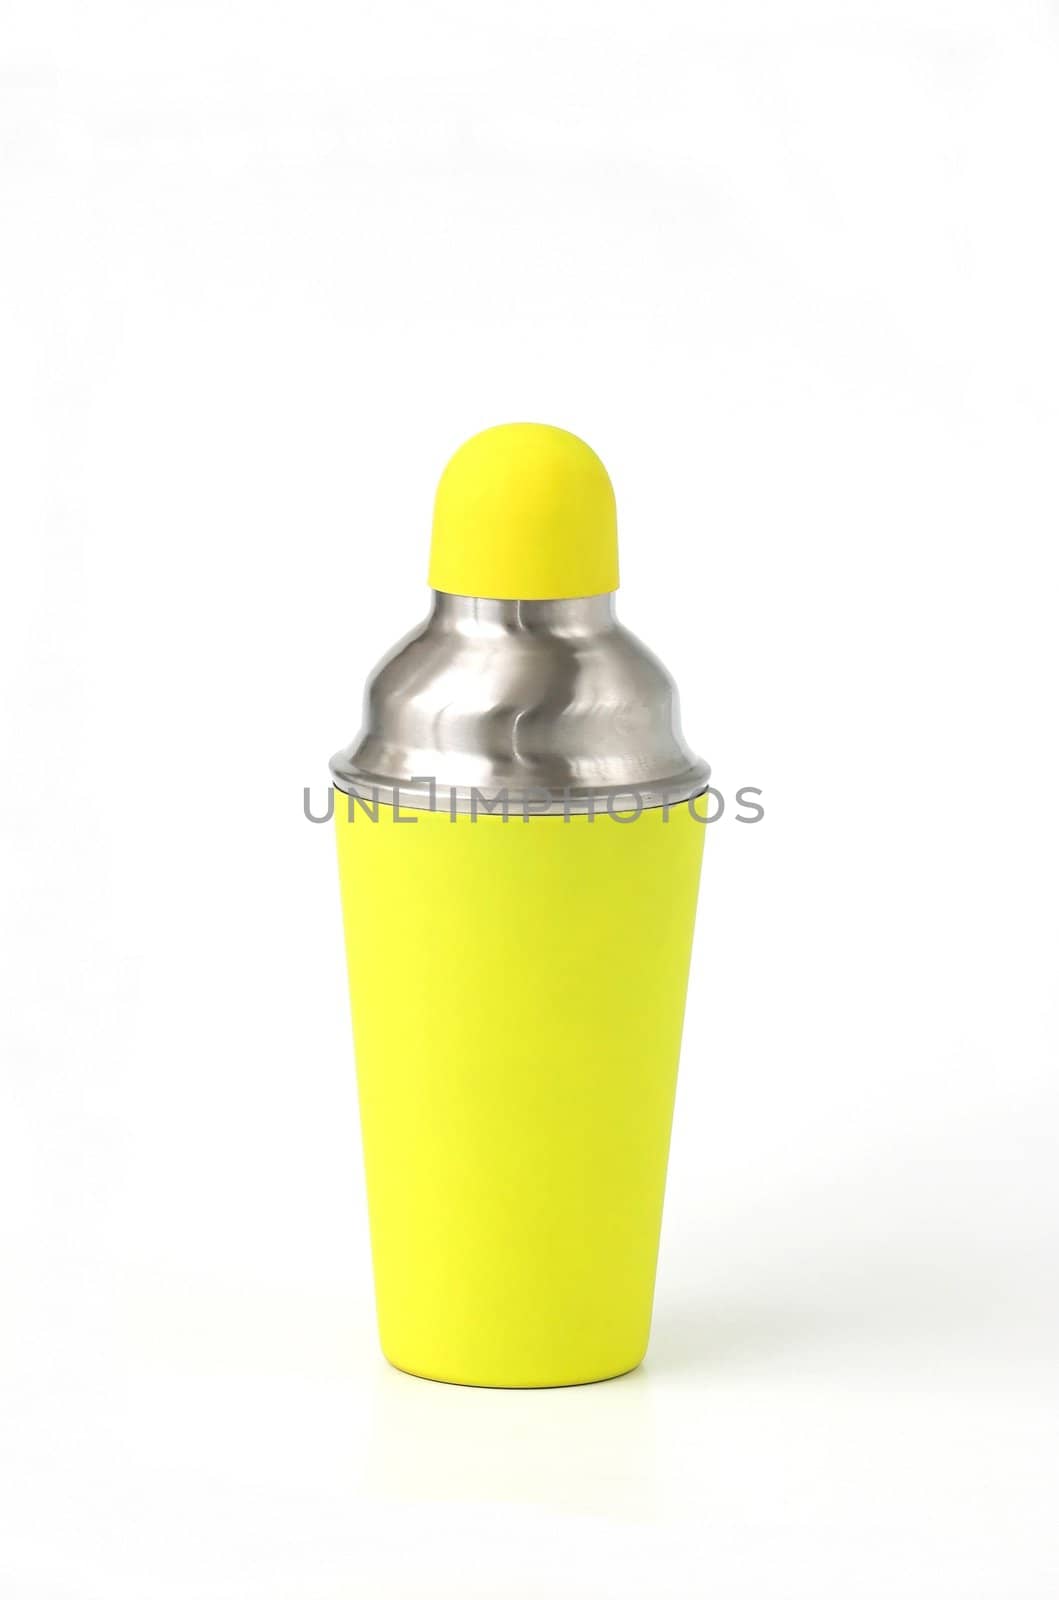 Steel and plastic covered shaker, green and silver, isolate